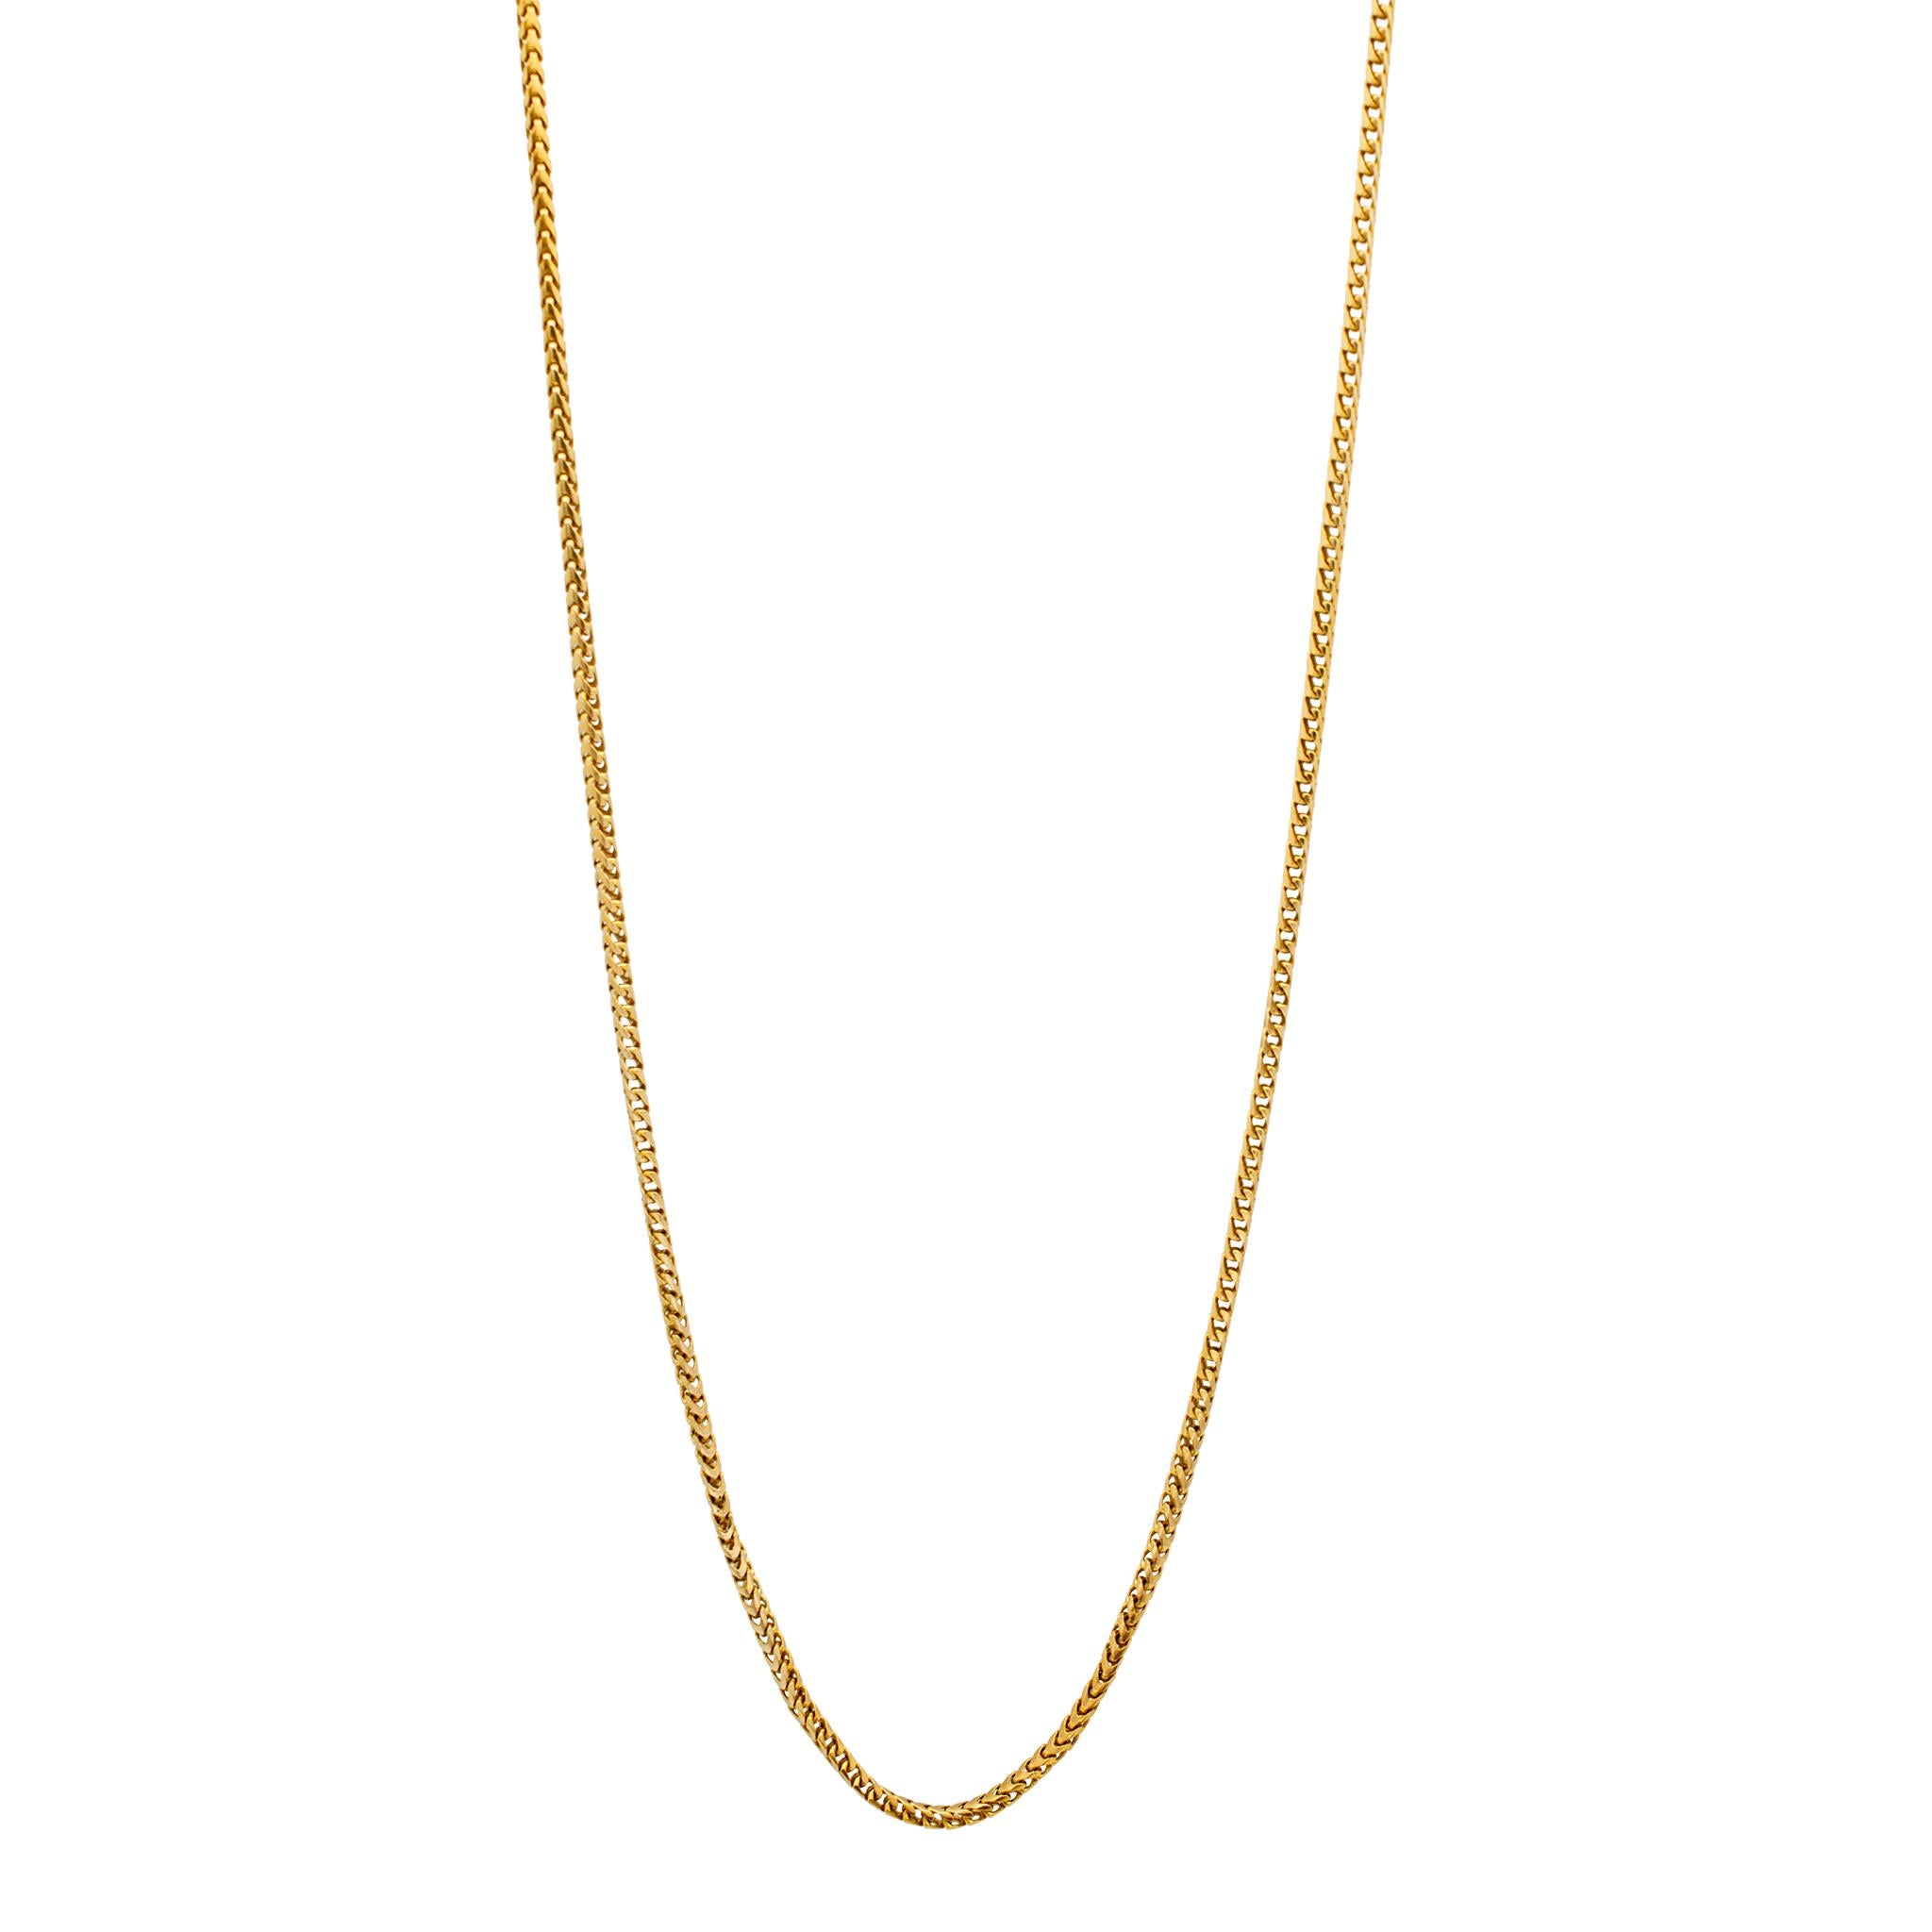 14K Yellow Gold Foxtail Link Chain 28”